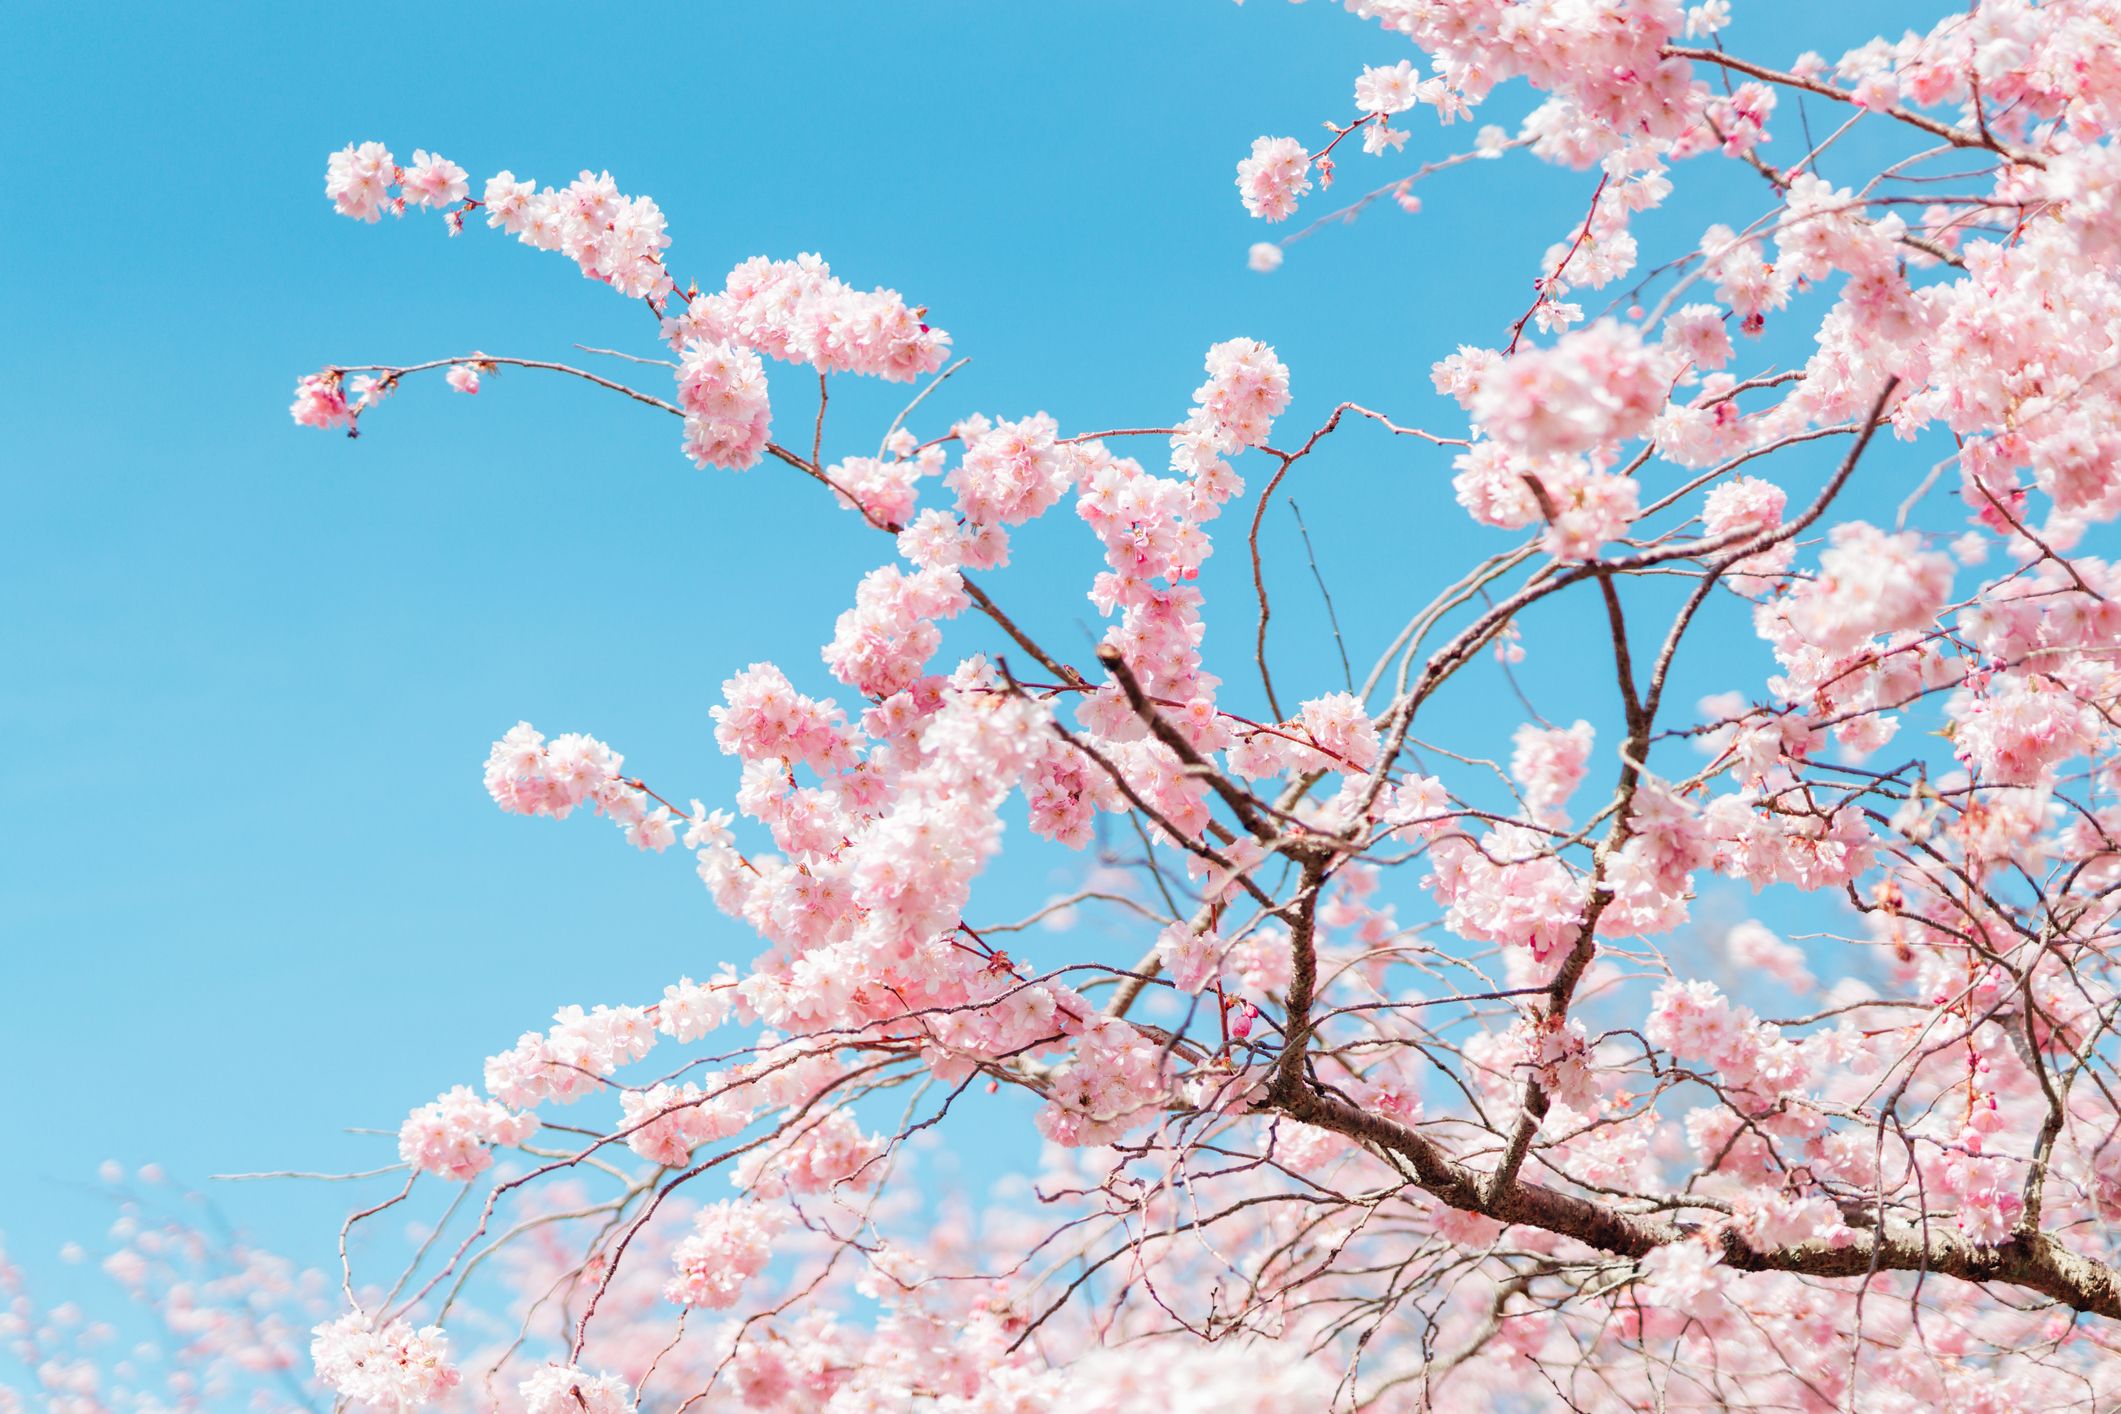 Peach Blossom Day 2022: Five Things To Know About the Beautiful March 3  Celebrations